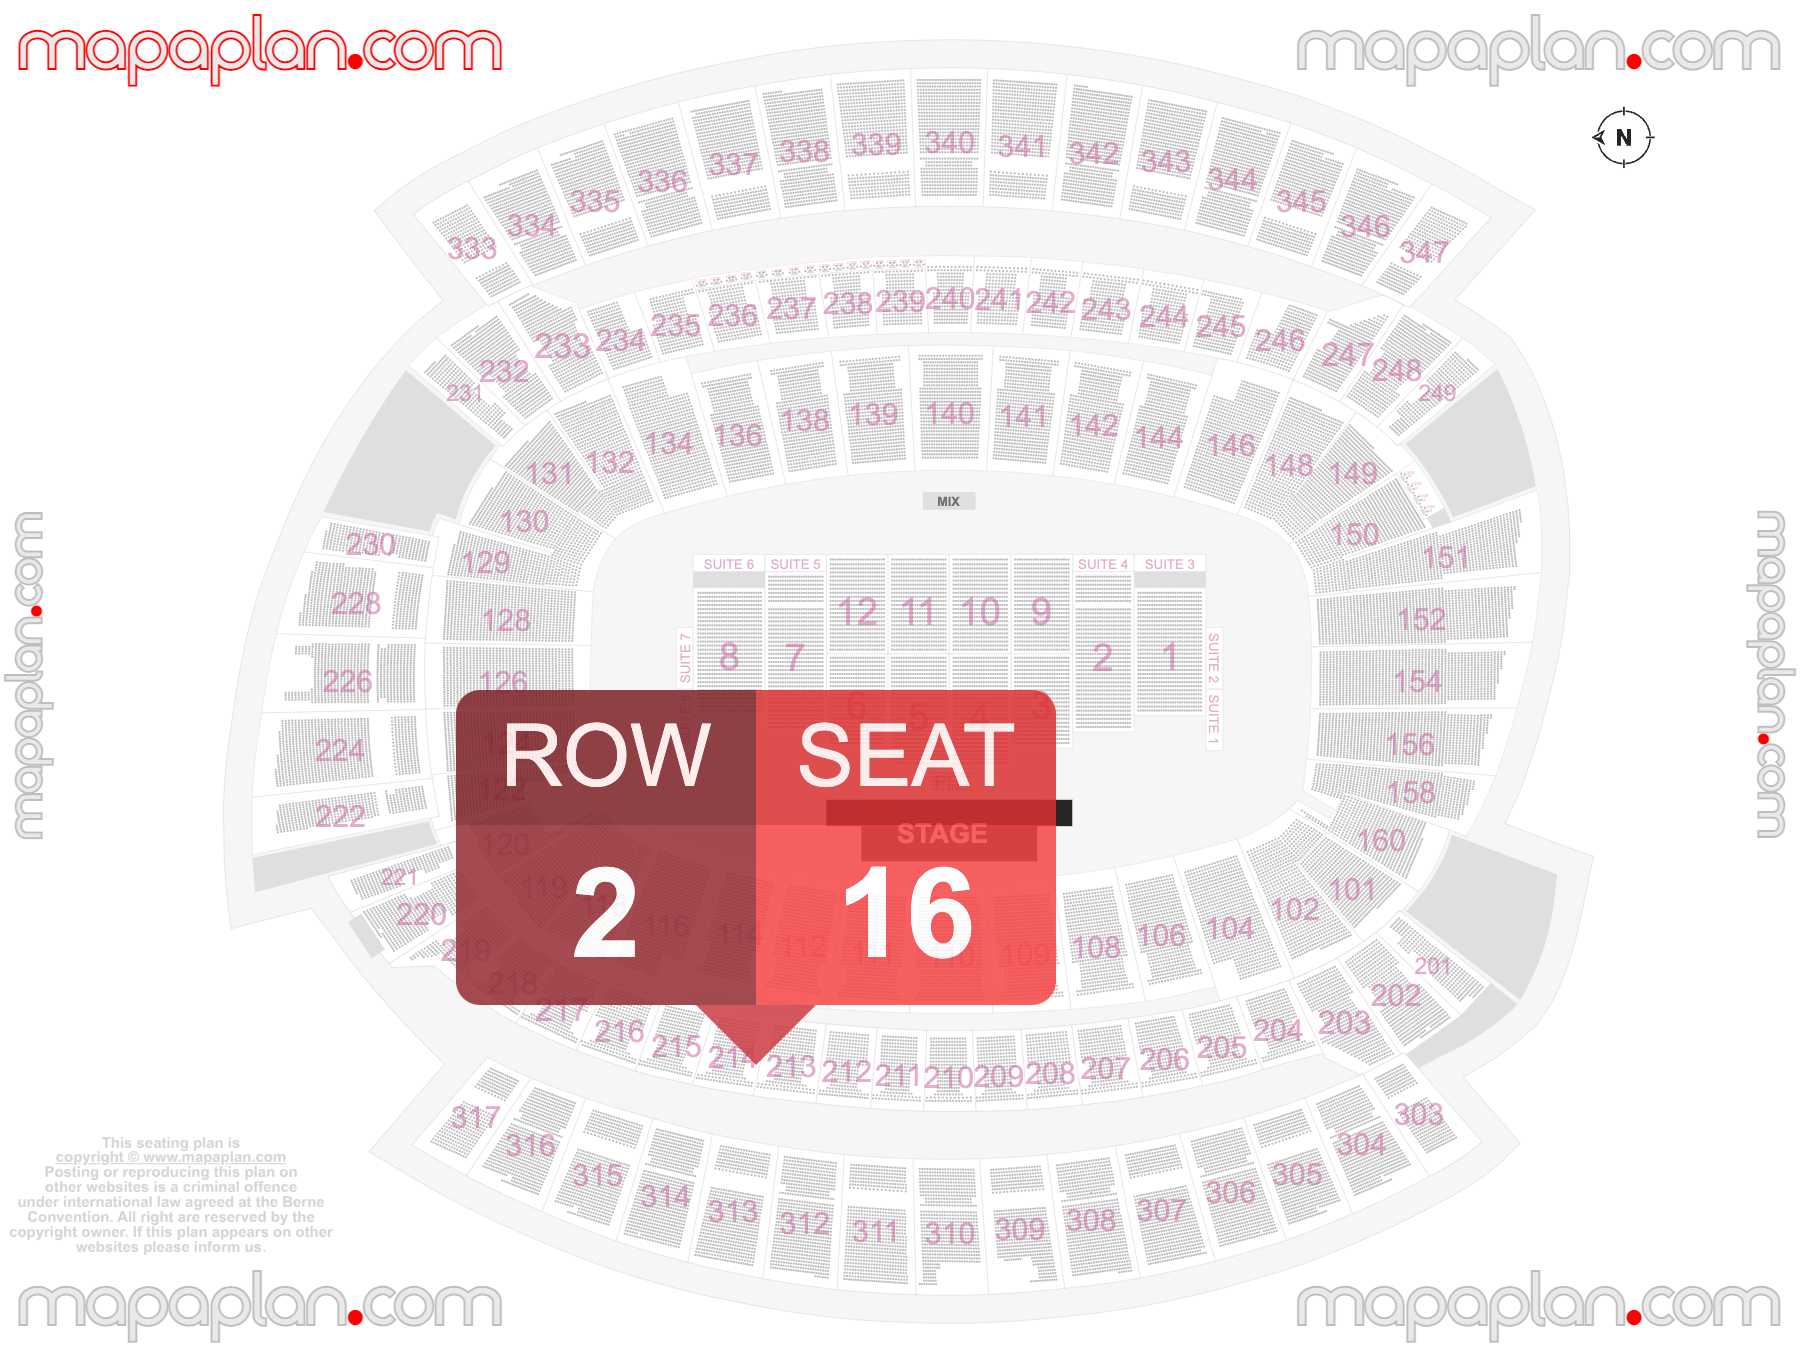 Cincinnati Paycor Stadium seating chart Concert with floor general admission PIT standing inside capacity view arrangement plan - Interactive virtual 3d best seats & rows detailed stadium image layout